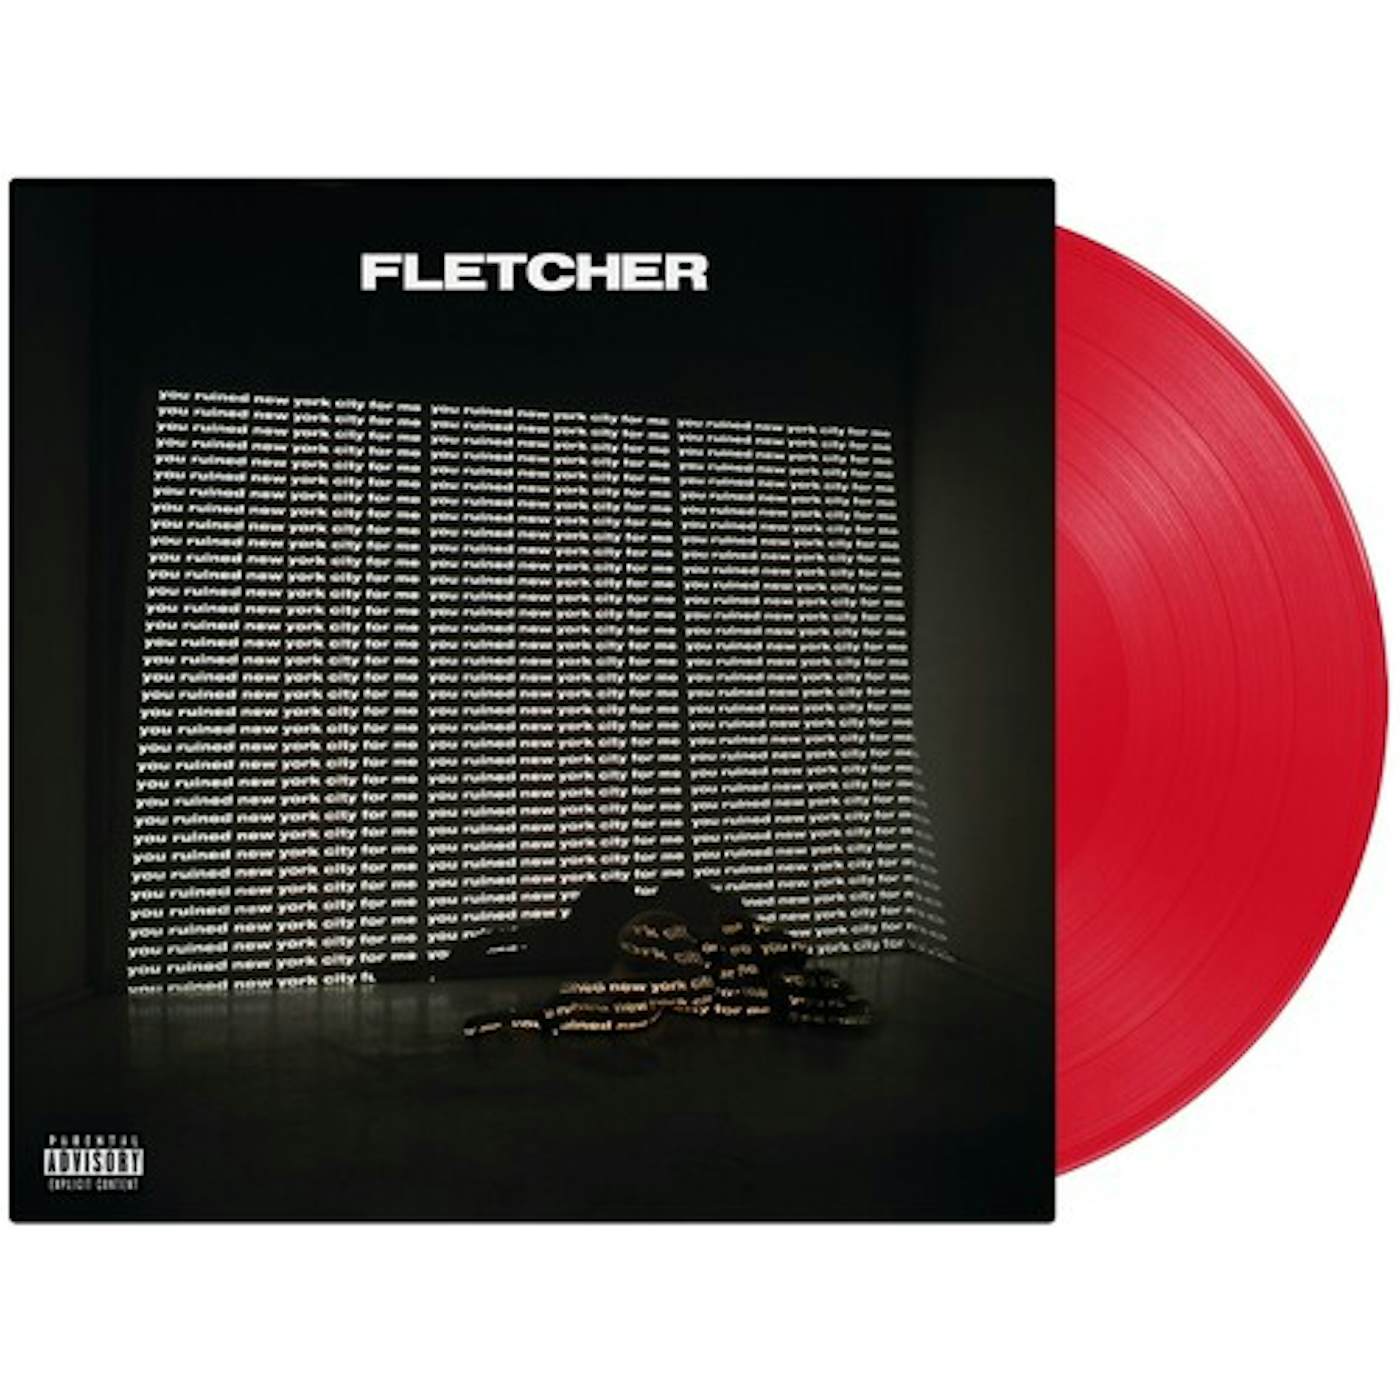 FLETCHER You Ruined New York City For Me Vinyl Record